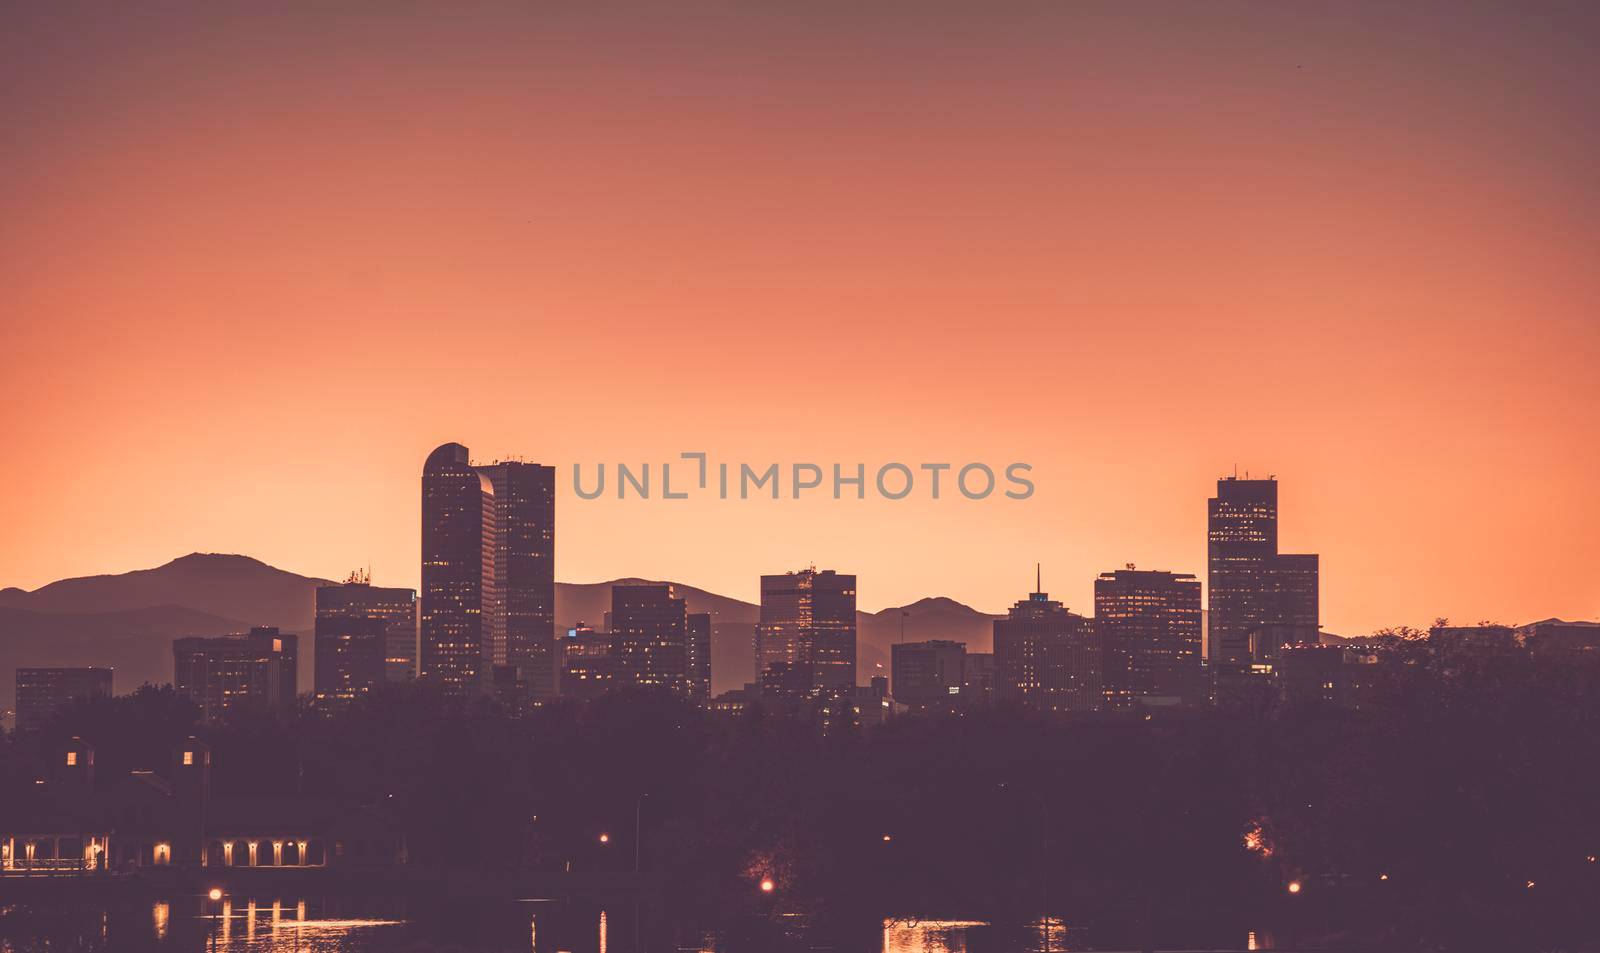 Denver Colorado Skyline Sunset Scenery. Warm Pinky Color Grading Theme. Downtown District. United States of America.